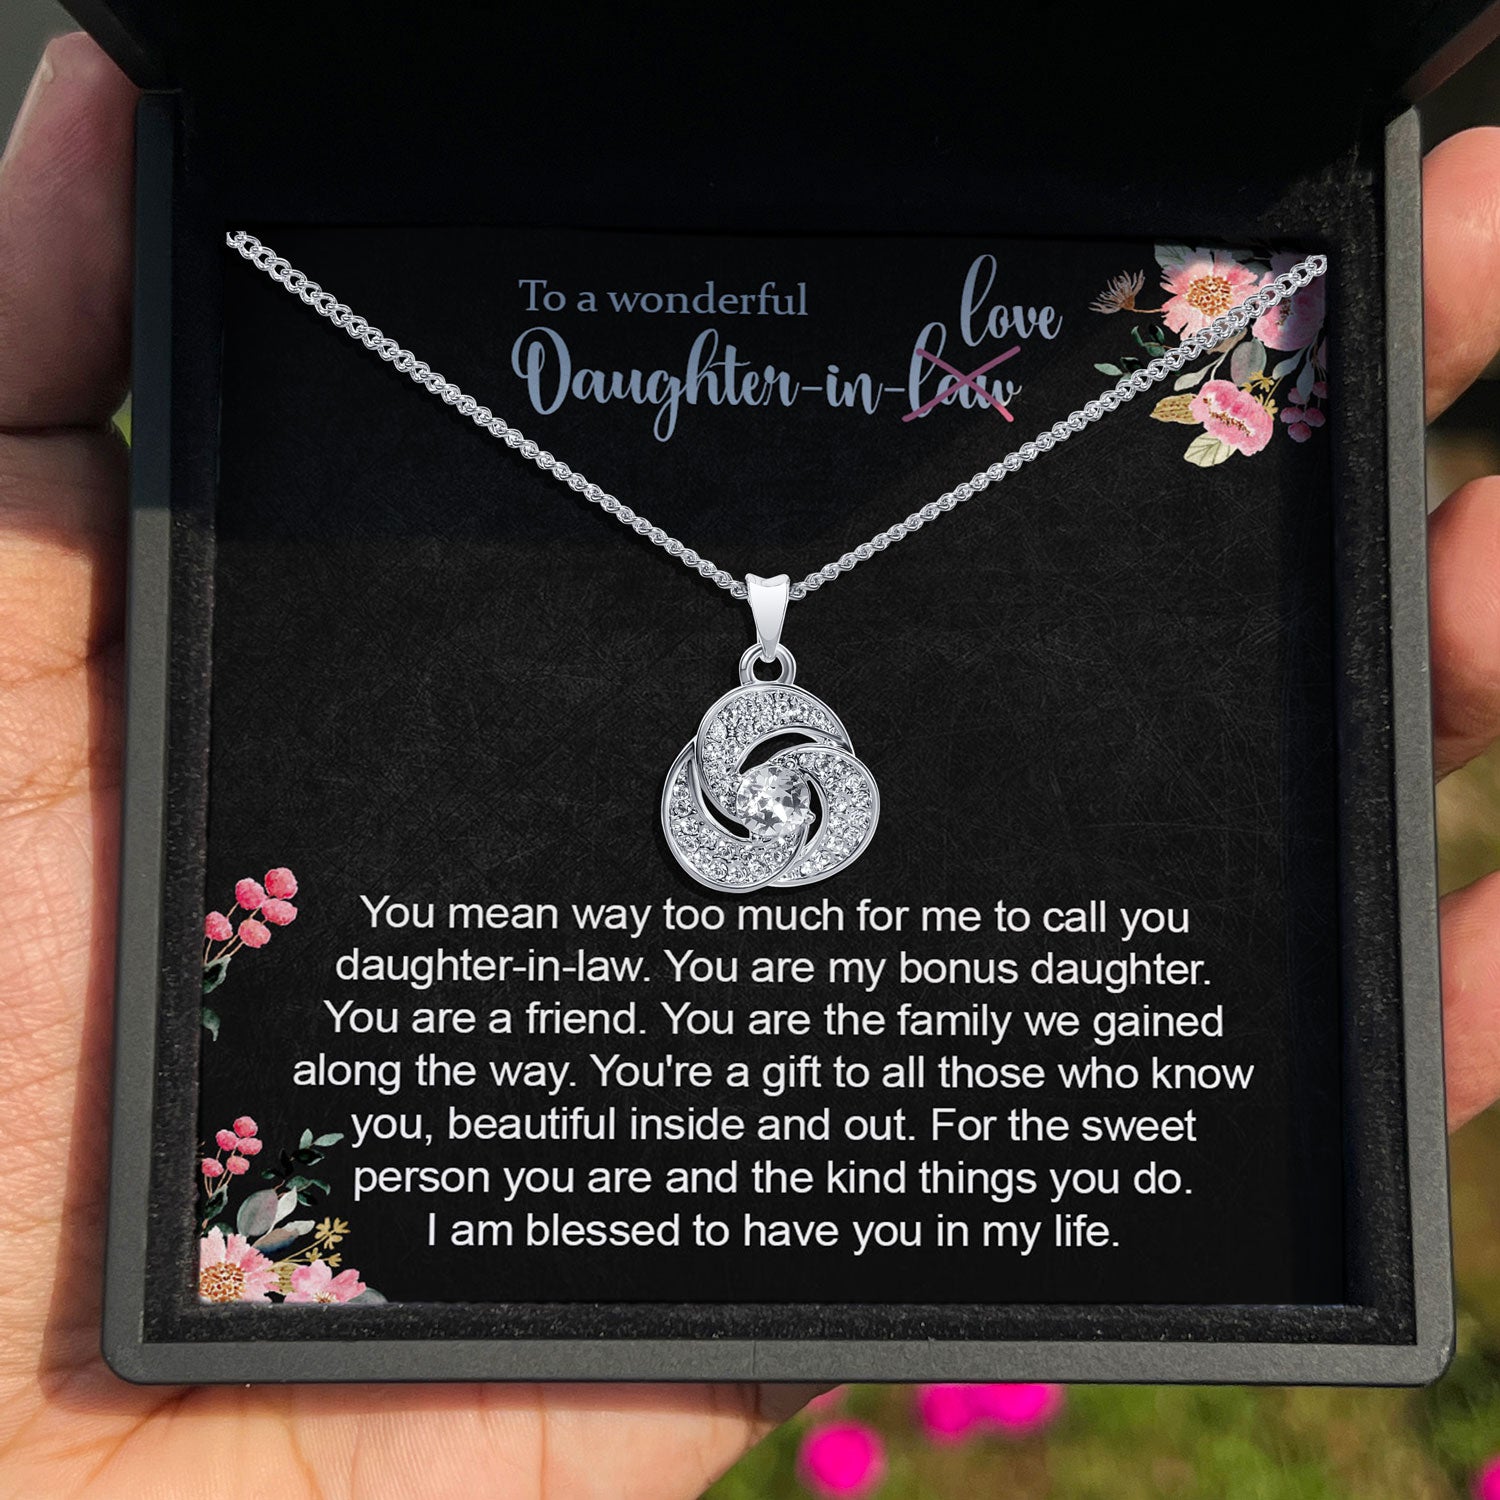 To My Wonderful Daughter-in-Love - I am Blessed to Have You In My Life - Tryndi Love Knot Necklace